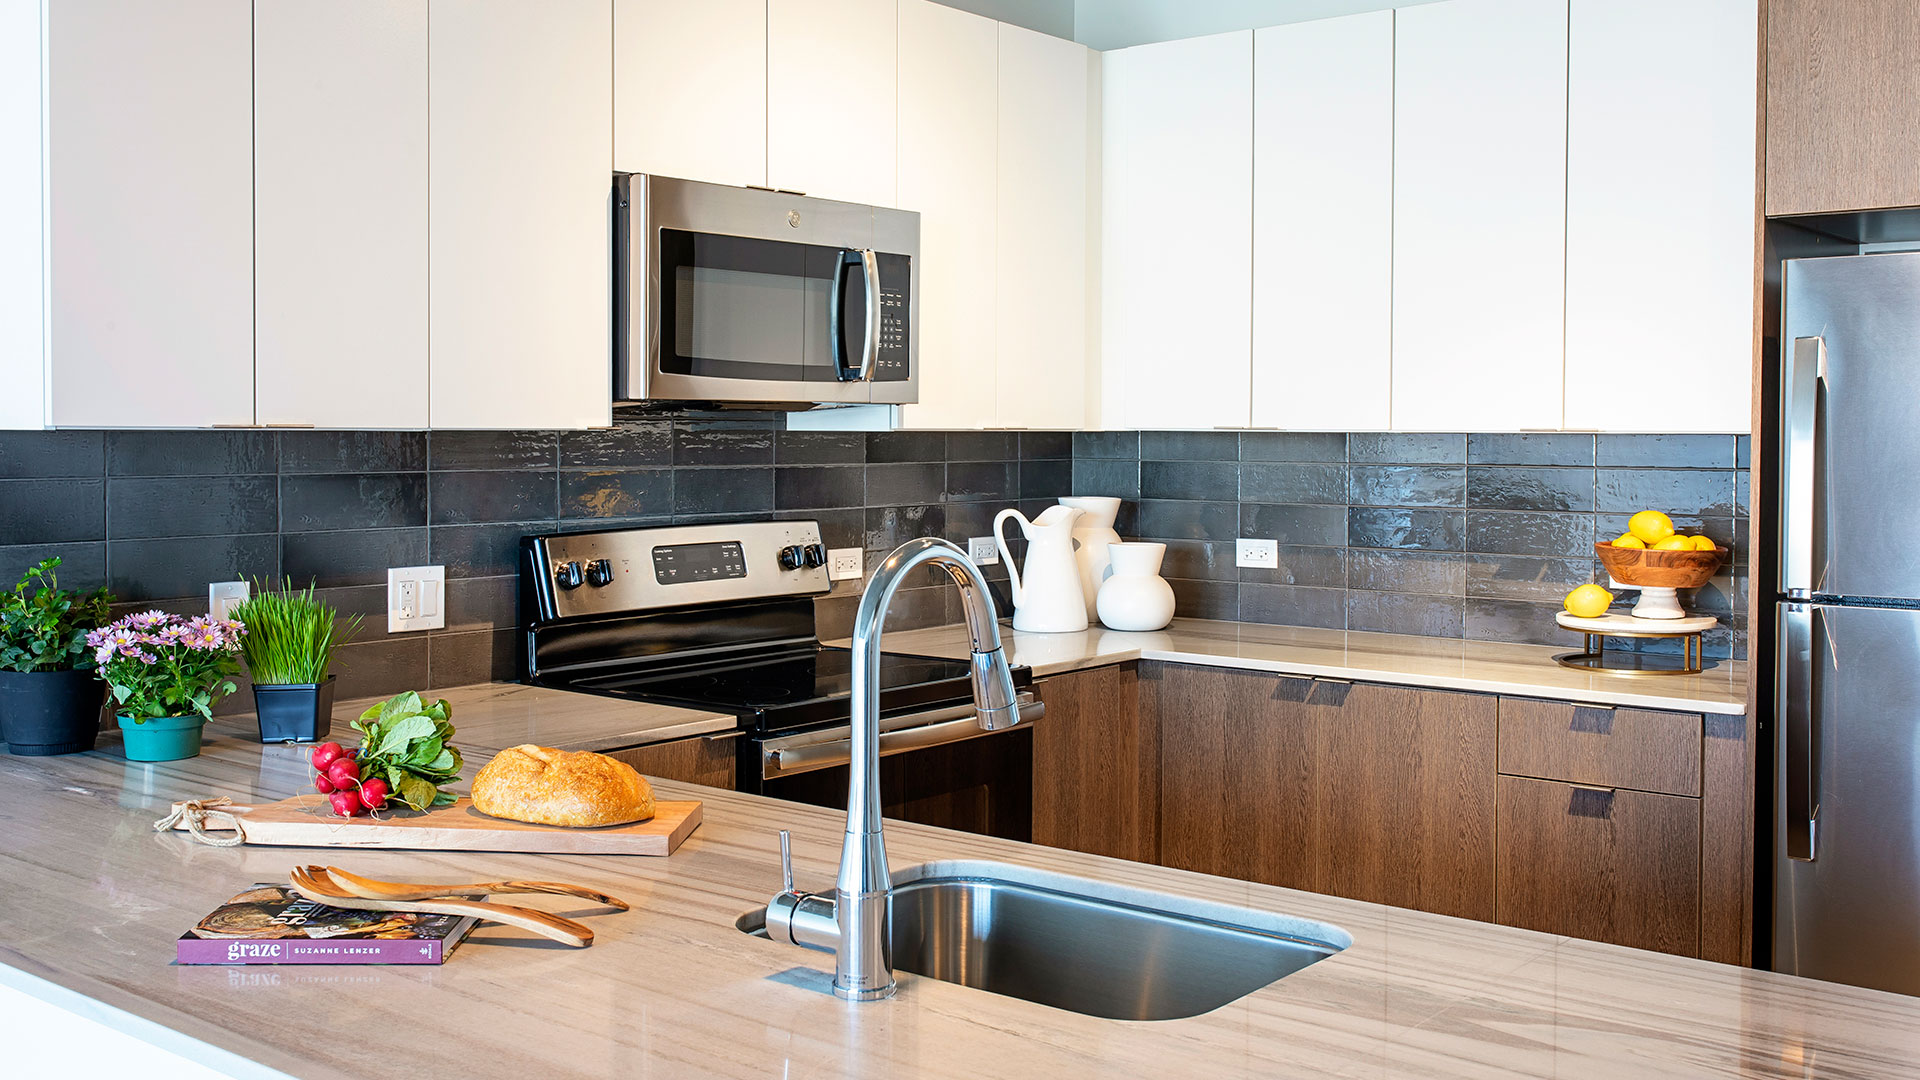 Aspire Residences South Loop luxury apartments for rent now leasing!